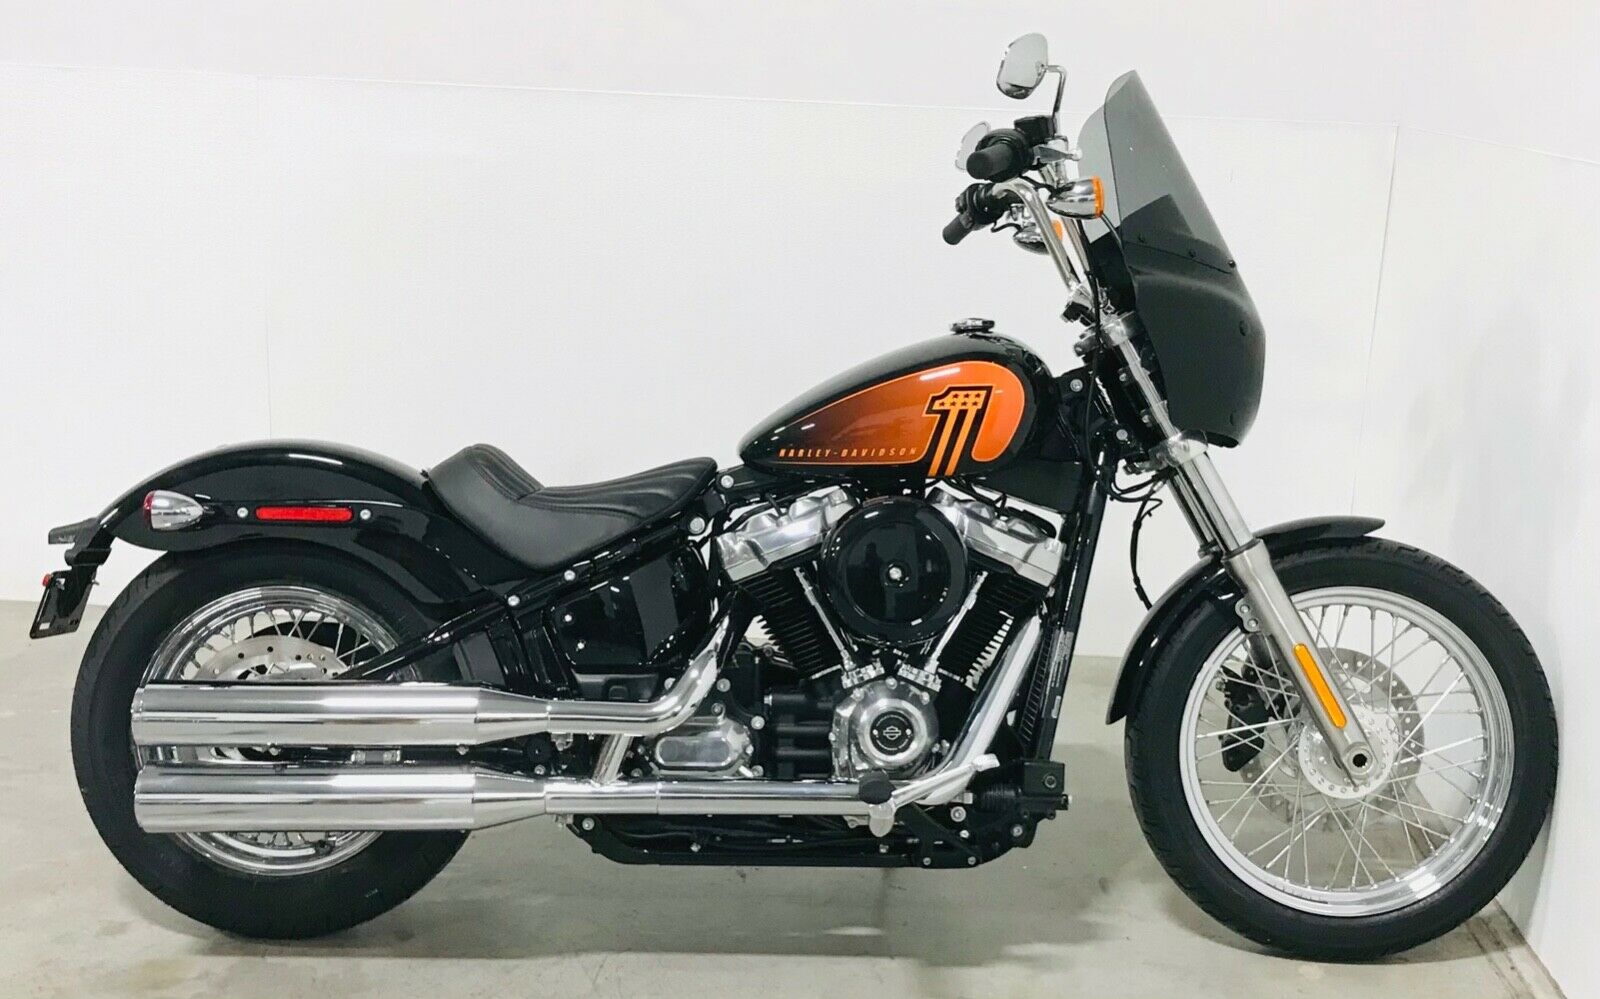 2020 Harley-davidson Softail  2020 Harley-davidson Softail Only 182 Miles Like New Completely Unmolested Mint